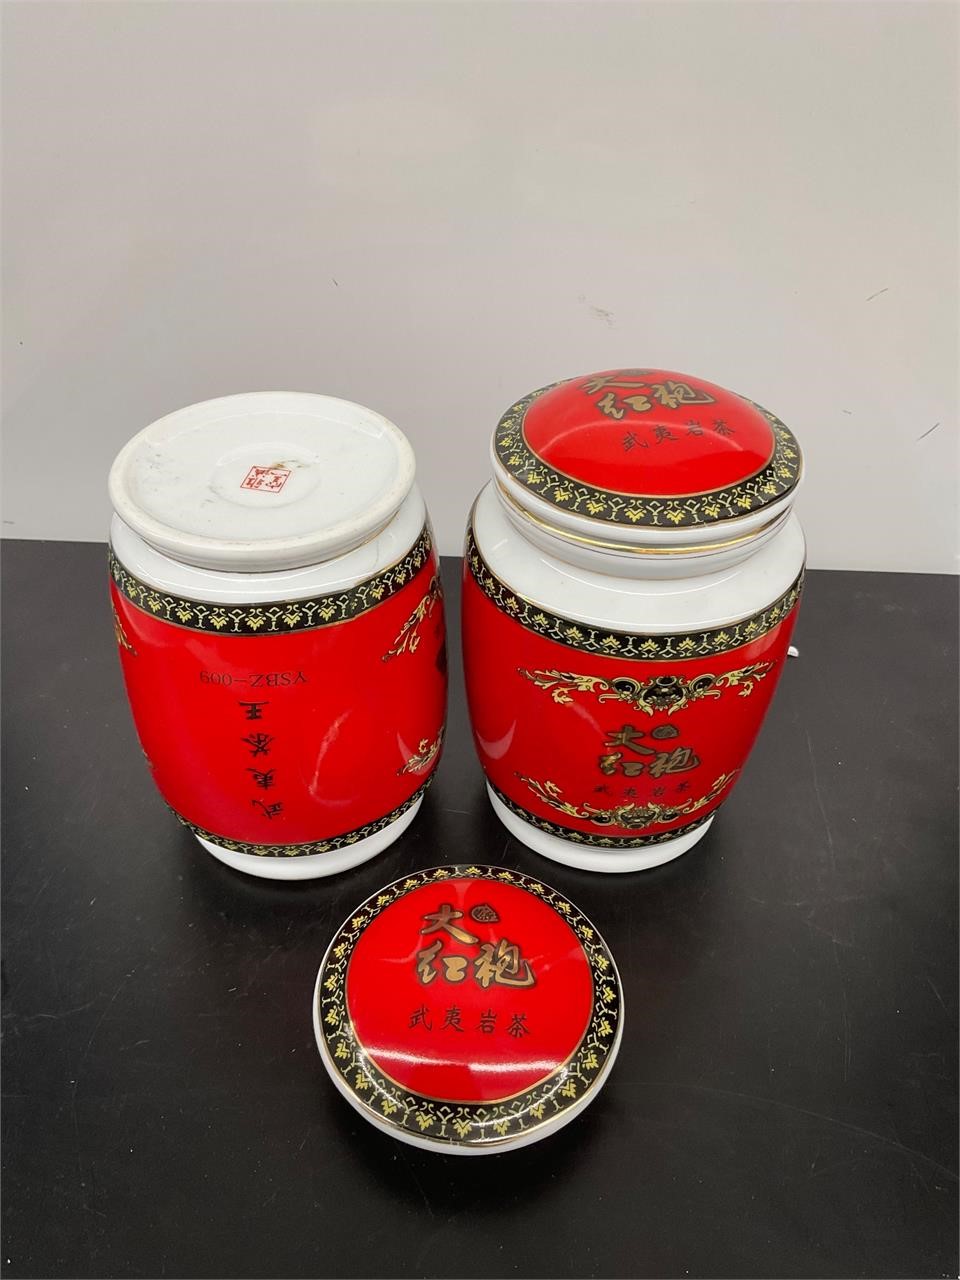 Highly collectable Asian stamped porcelain jars